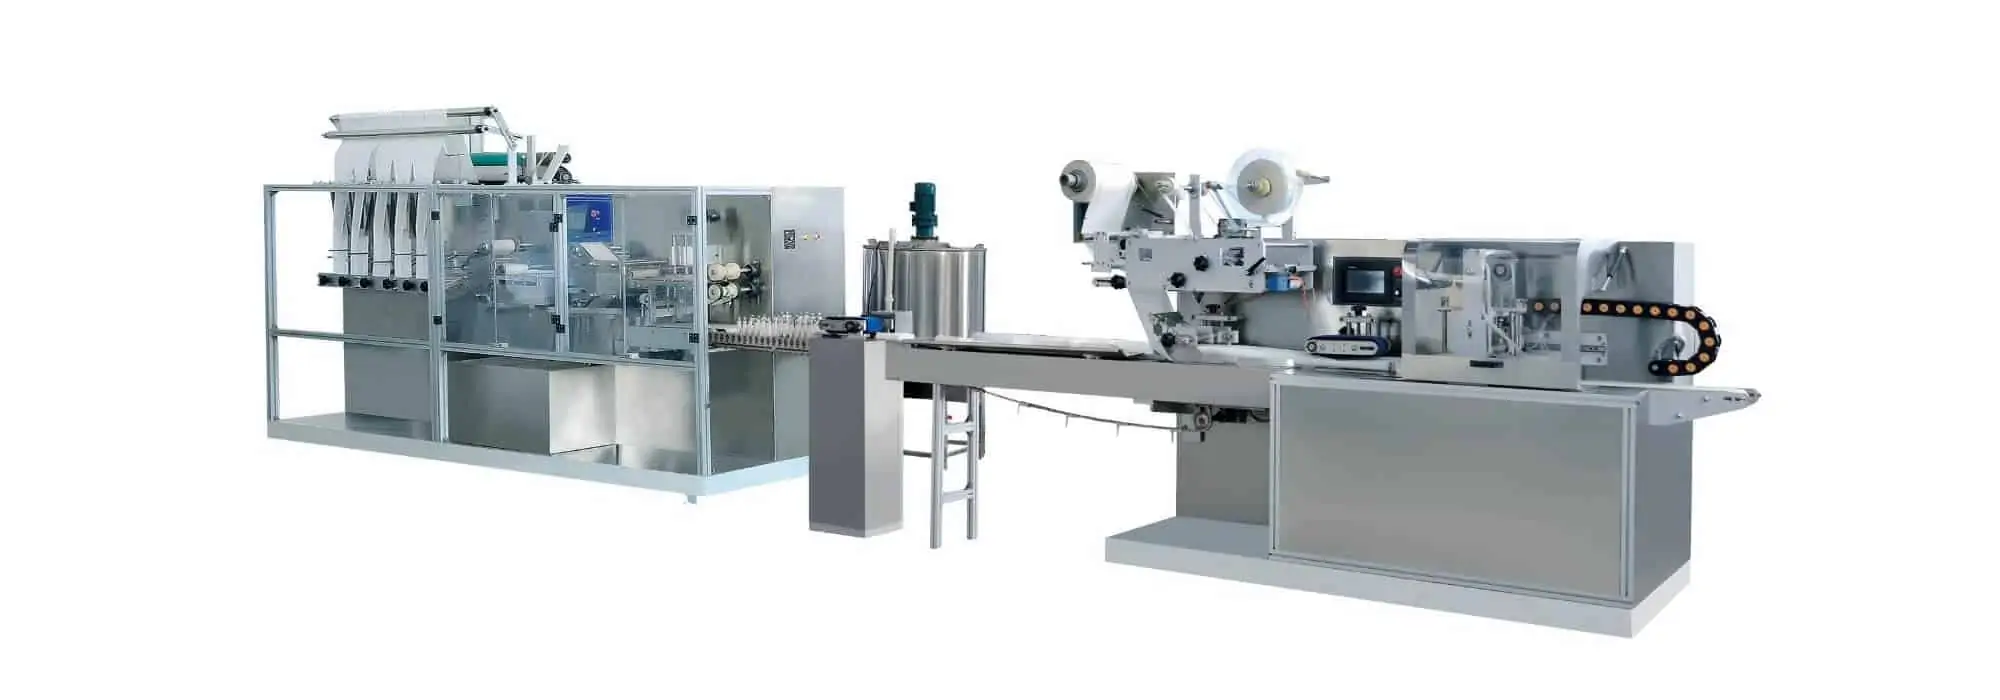 DH 6F Automatic wet wipes production line - Baby Wet Wipes Machine